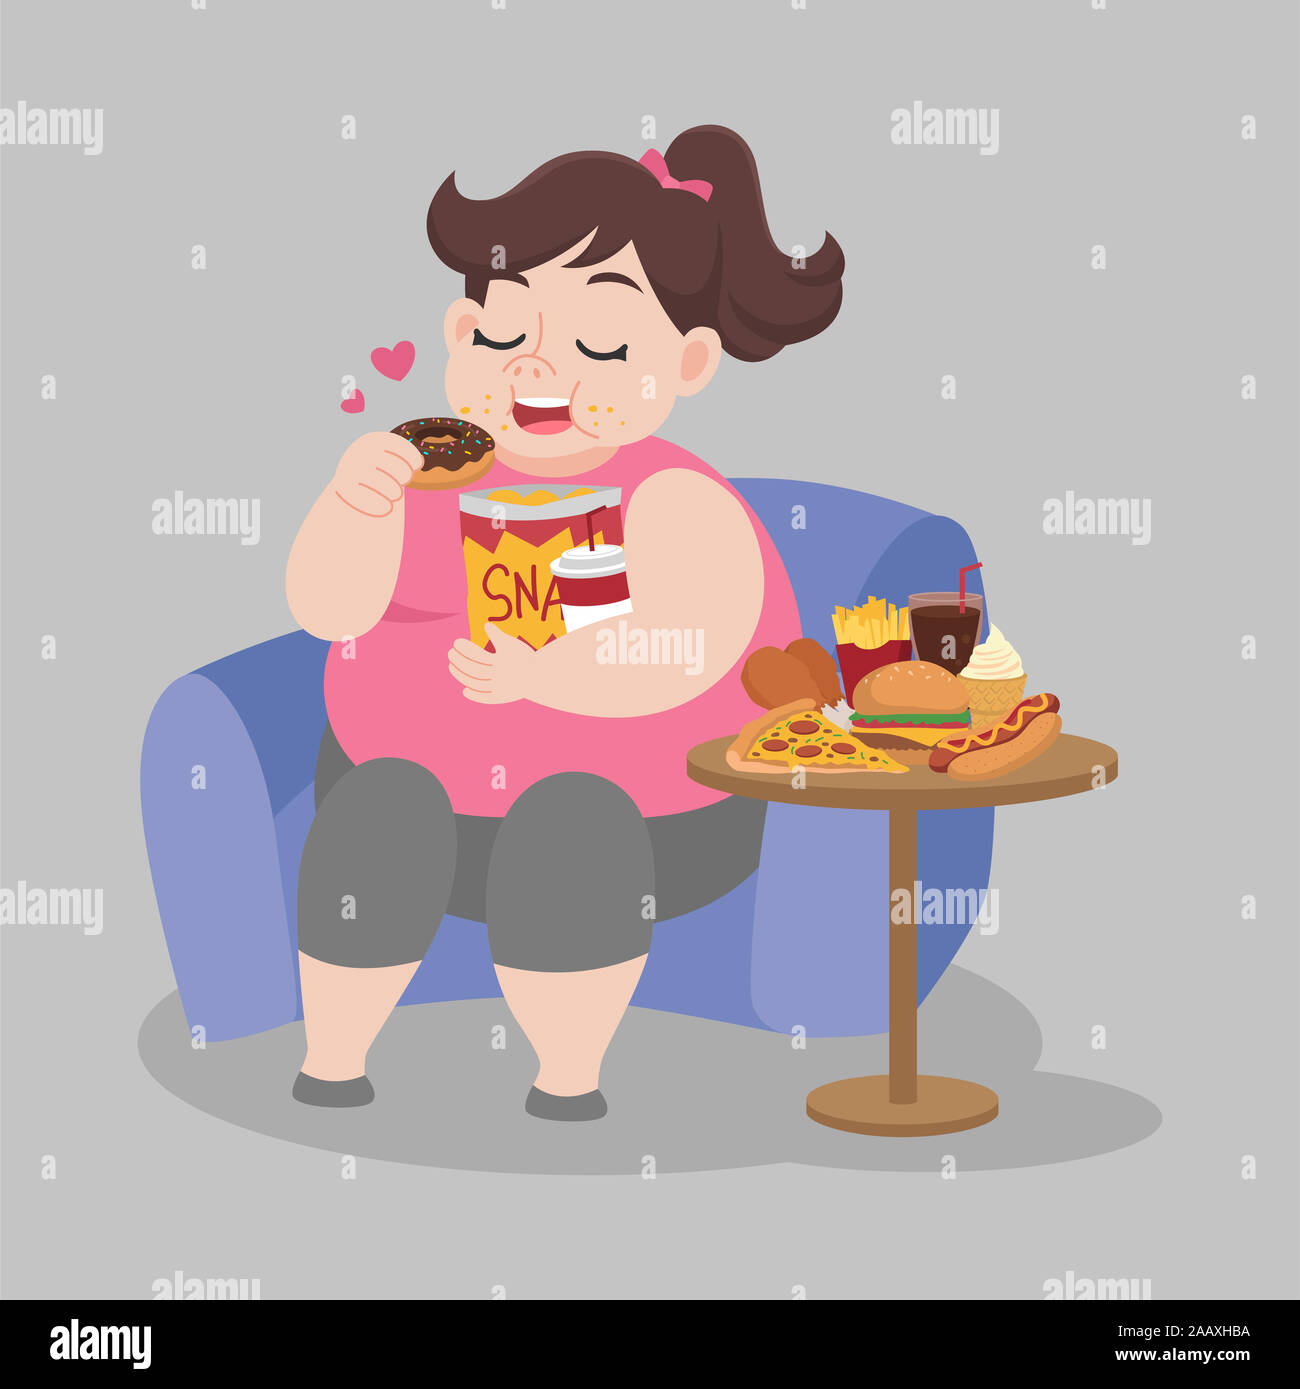 Big Fat Happy woman enjoy eating donut snack sitting on sofa, diet lose weight Healthcare concept Stock Photo